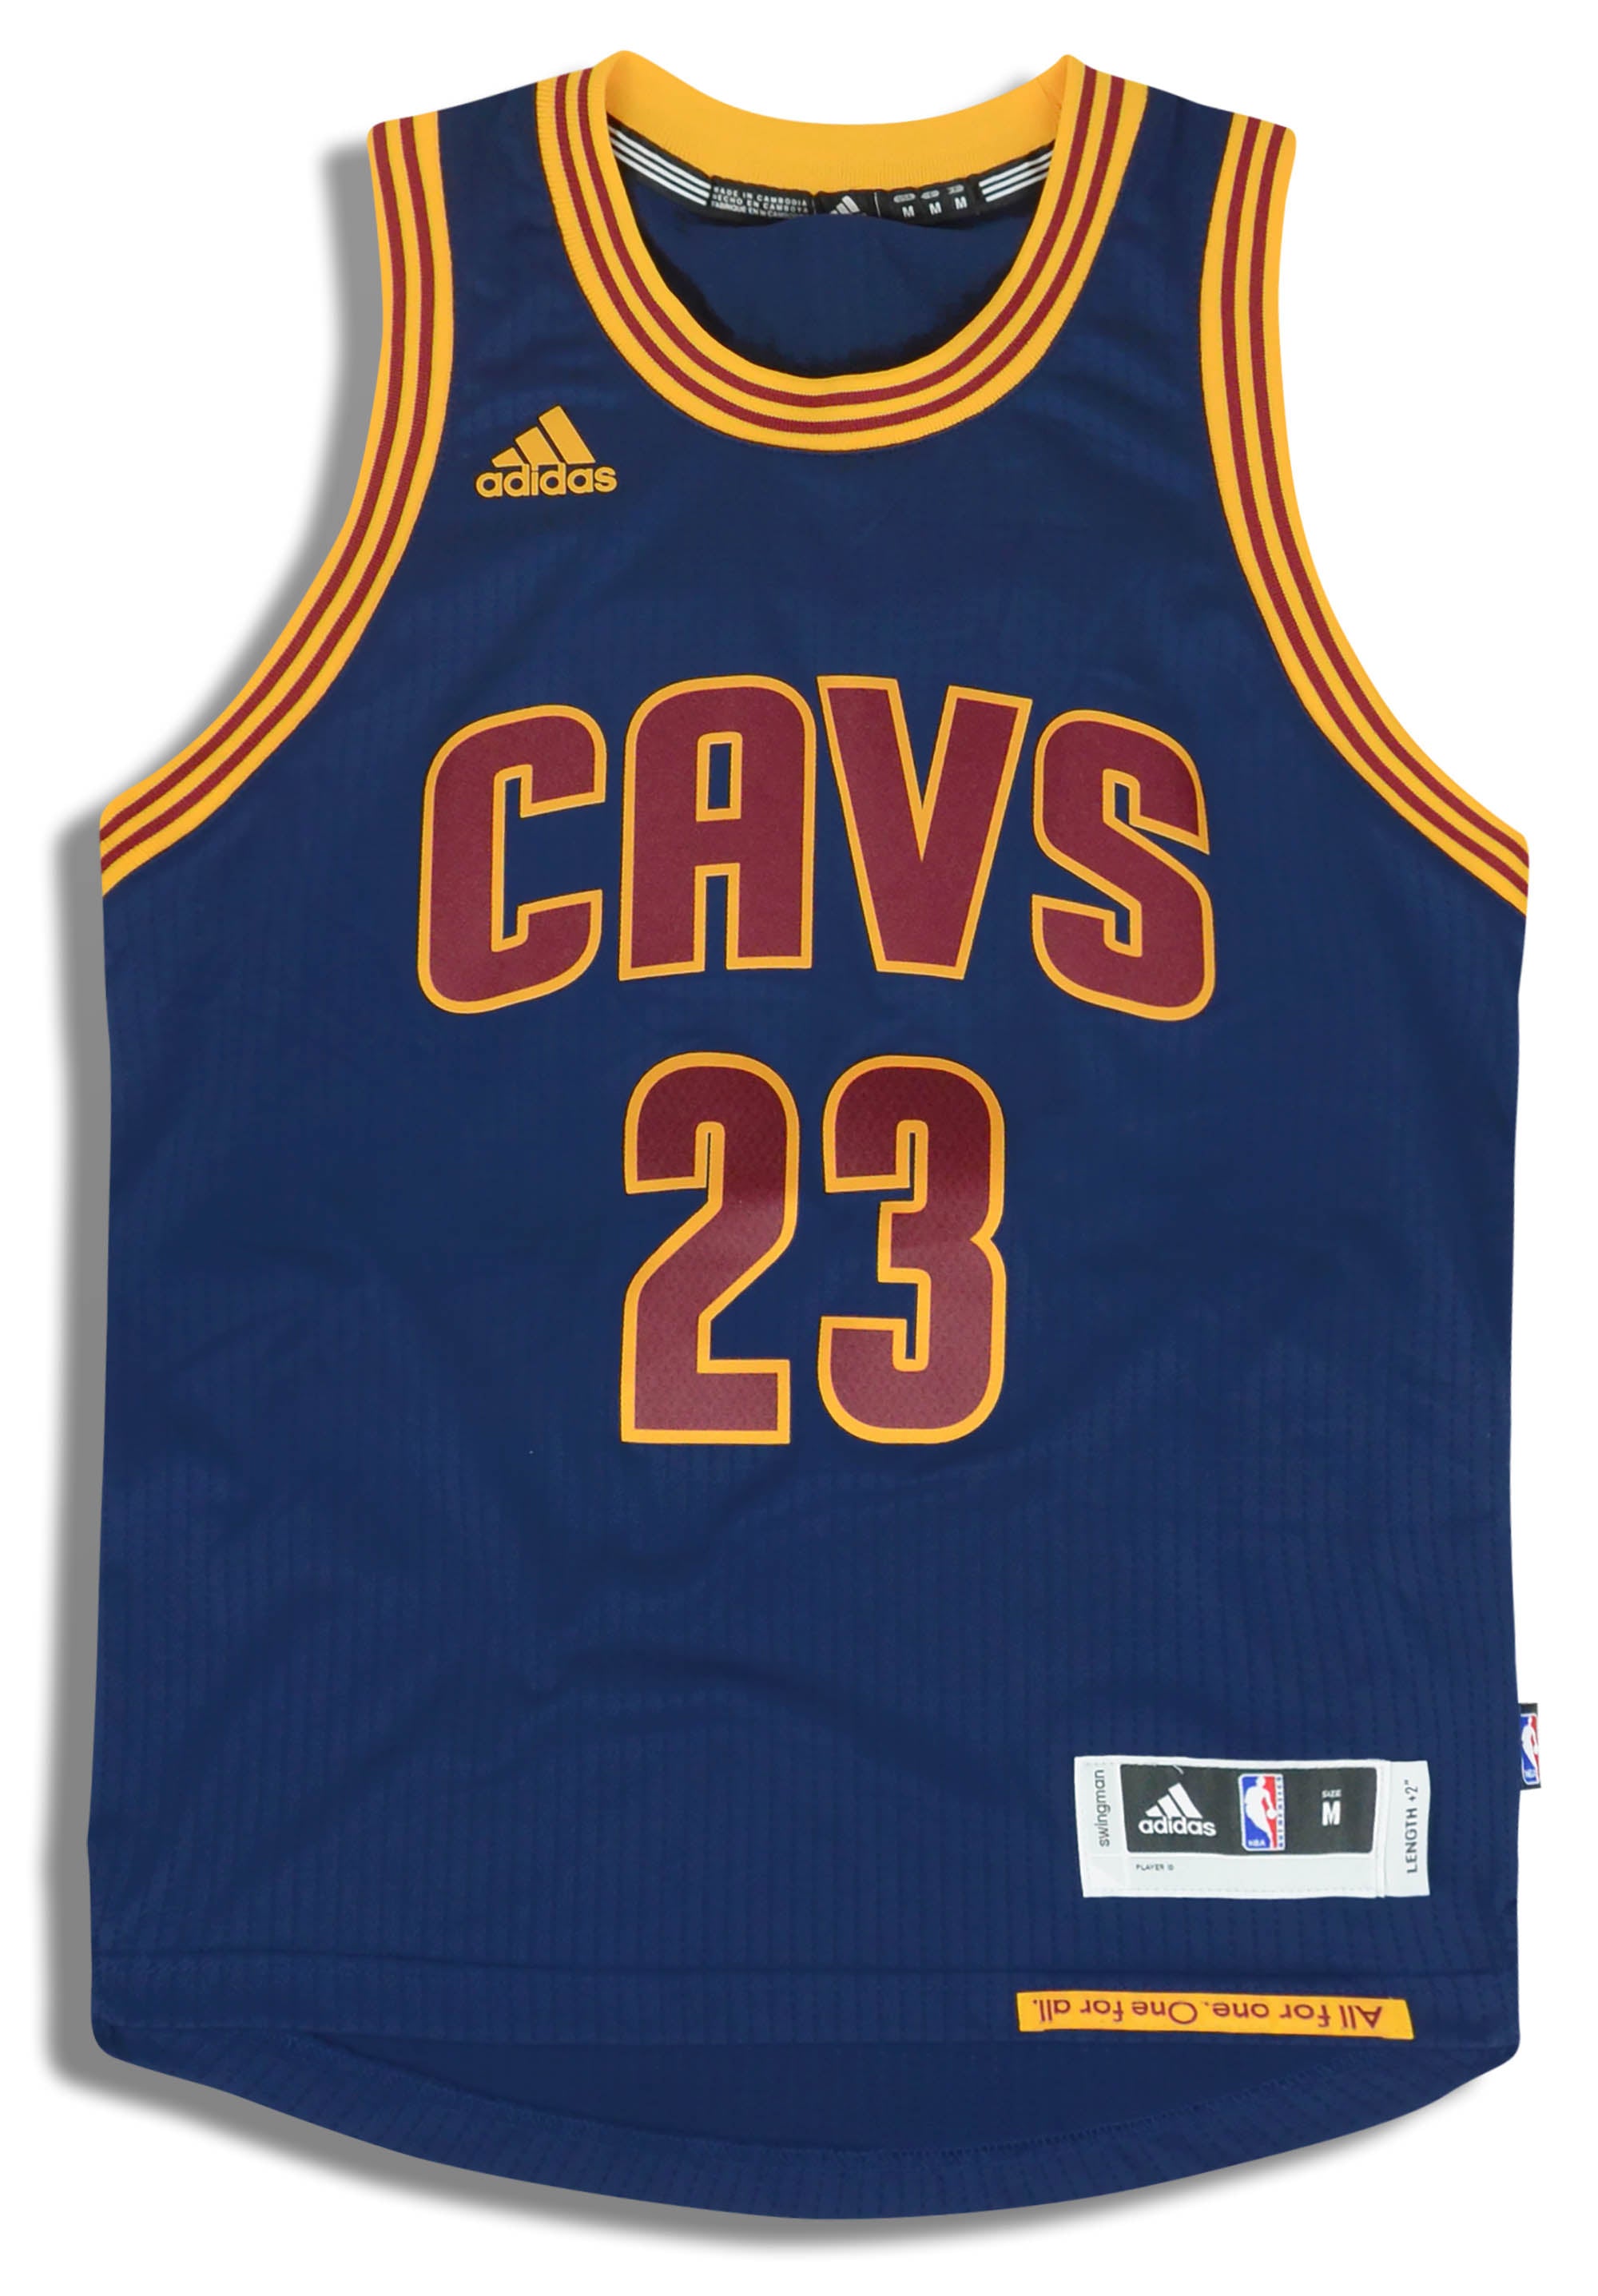 Adidas Lebron James #23 Cleveland Cavaliers Cavs Jersey Youth Size